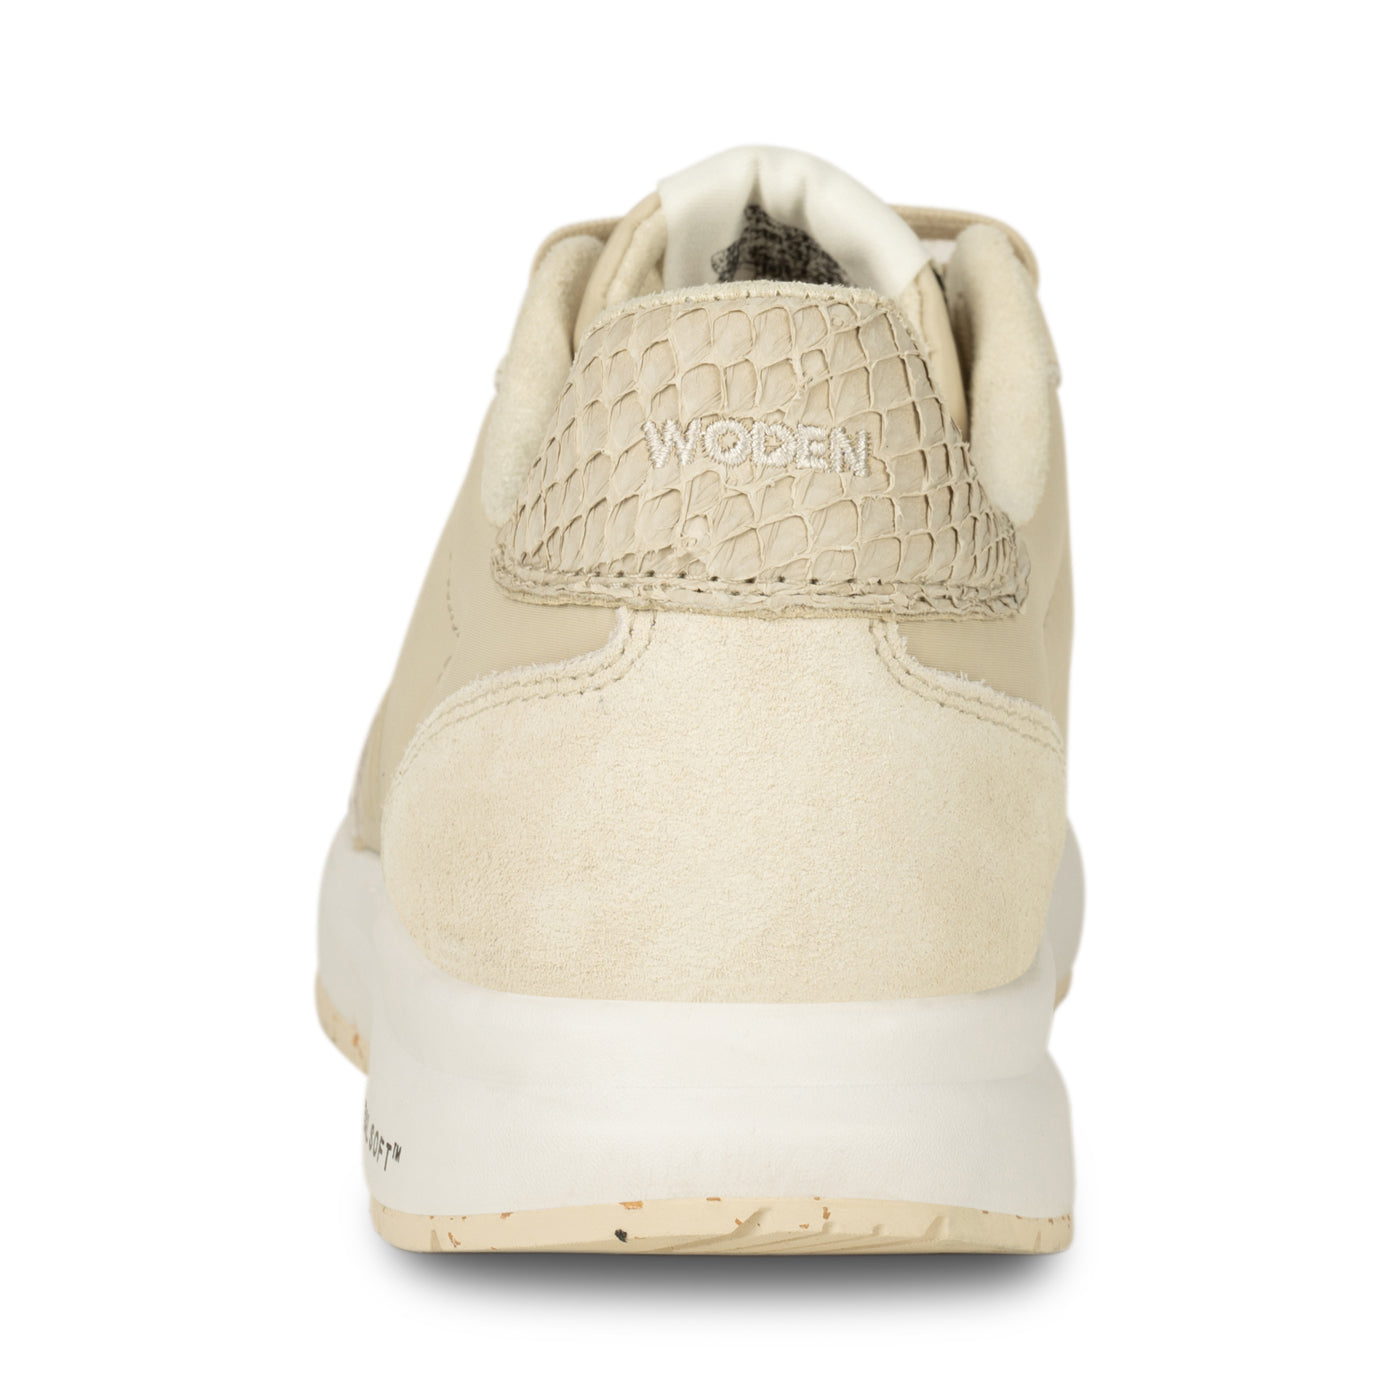 WODEN Nora Natural Soft Sneakers 813 Ivory